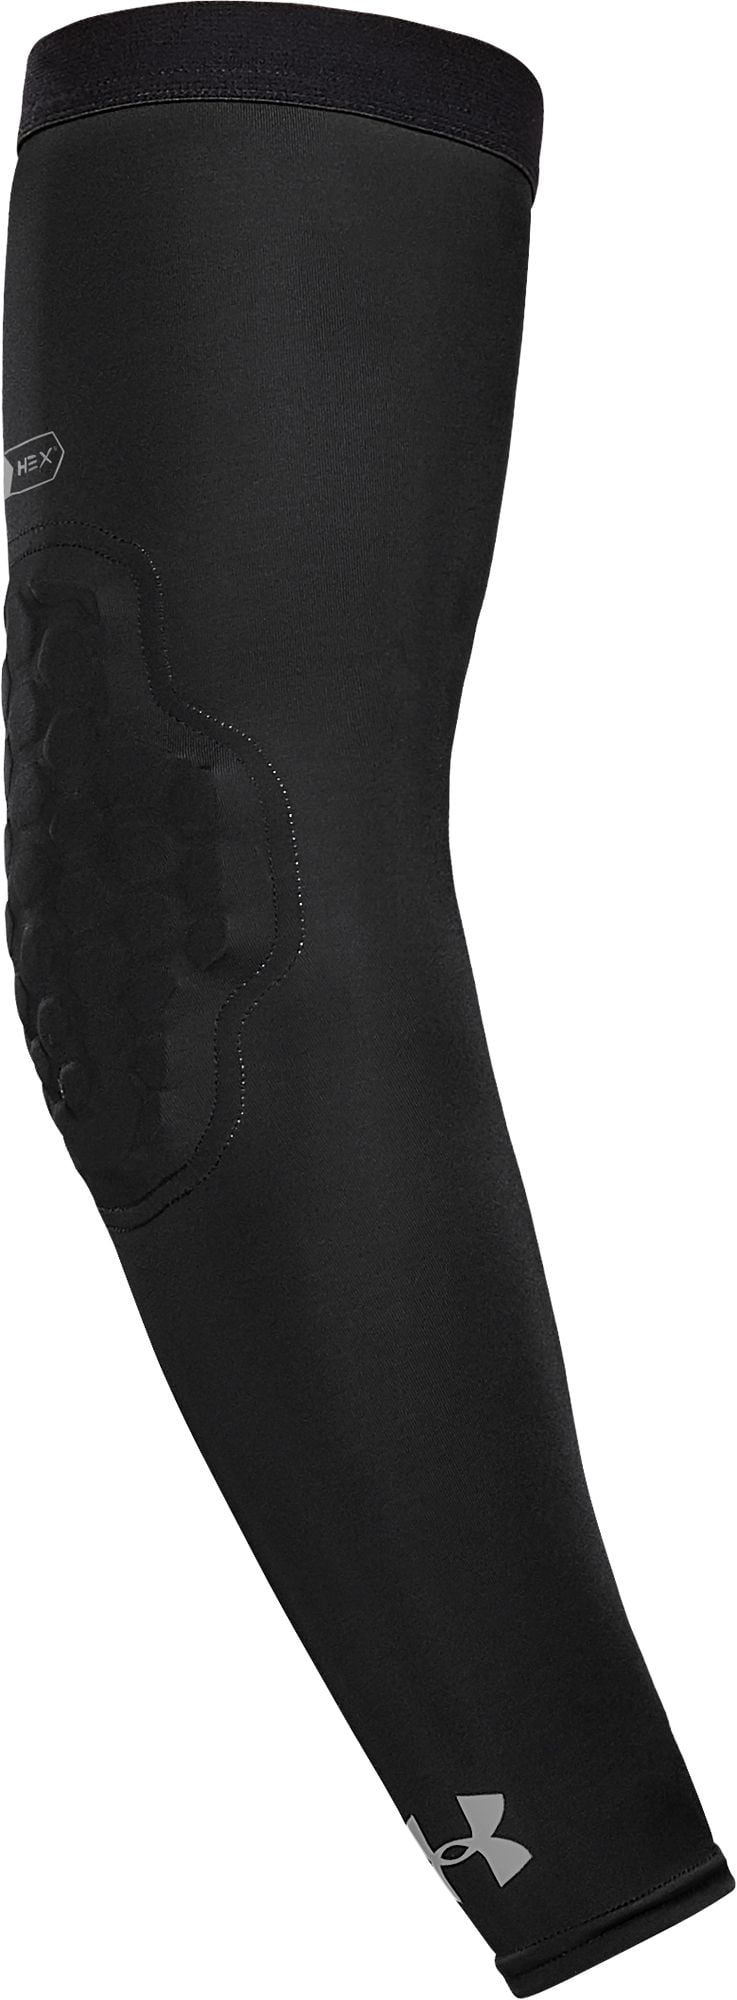 Under Armour Kids UA Armour 2.0 Knee Pads Youth Volleyball 1294850 Black White 